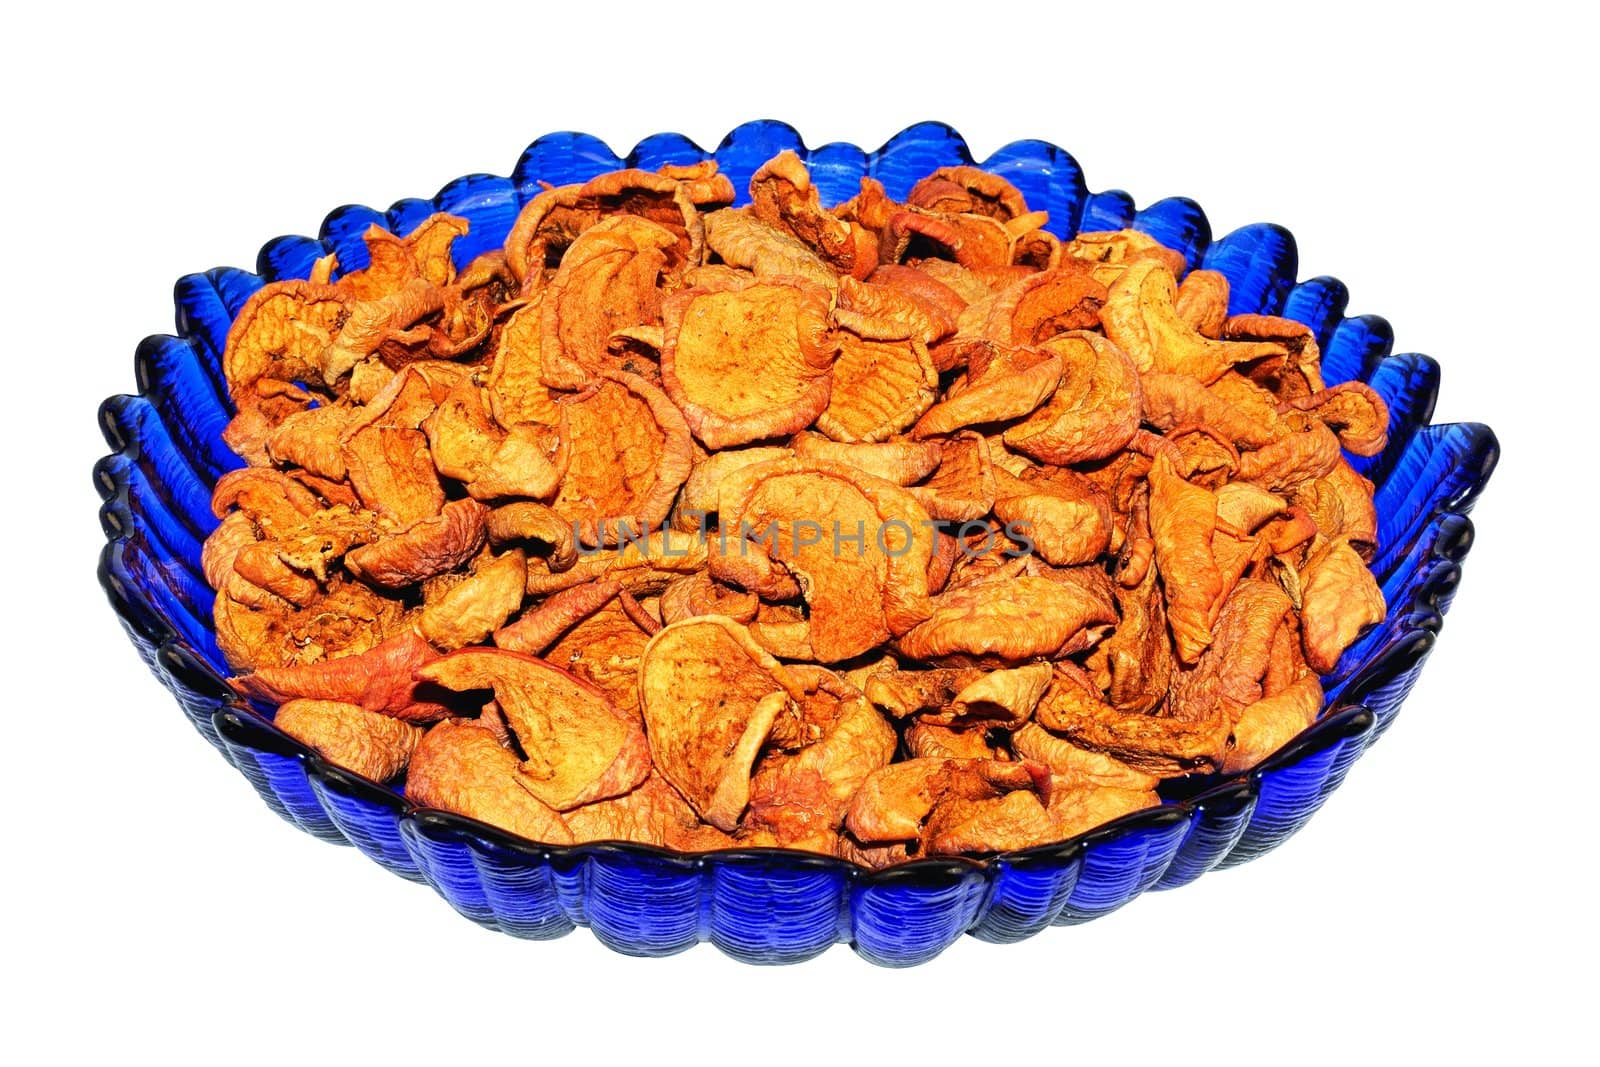 Dried fruits from apples  by zhaubasar